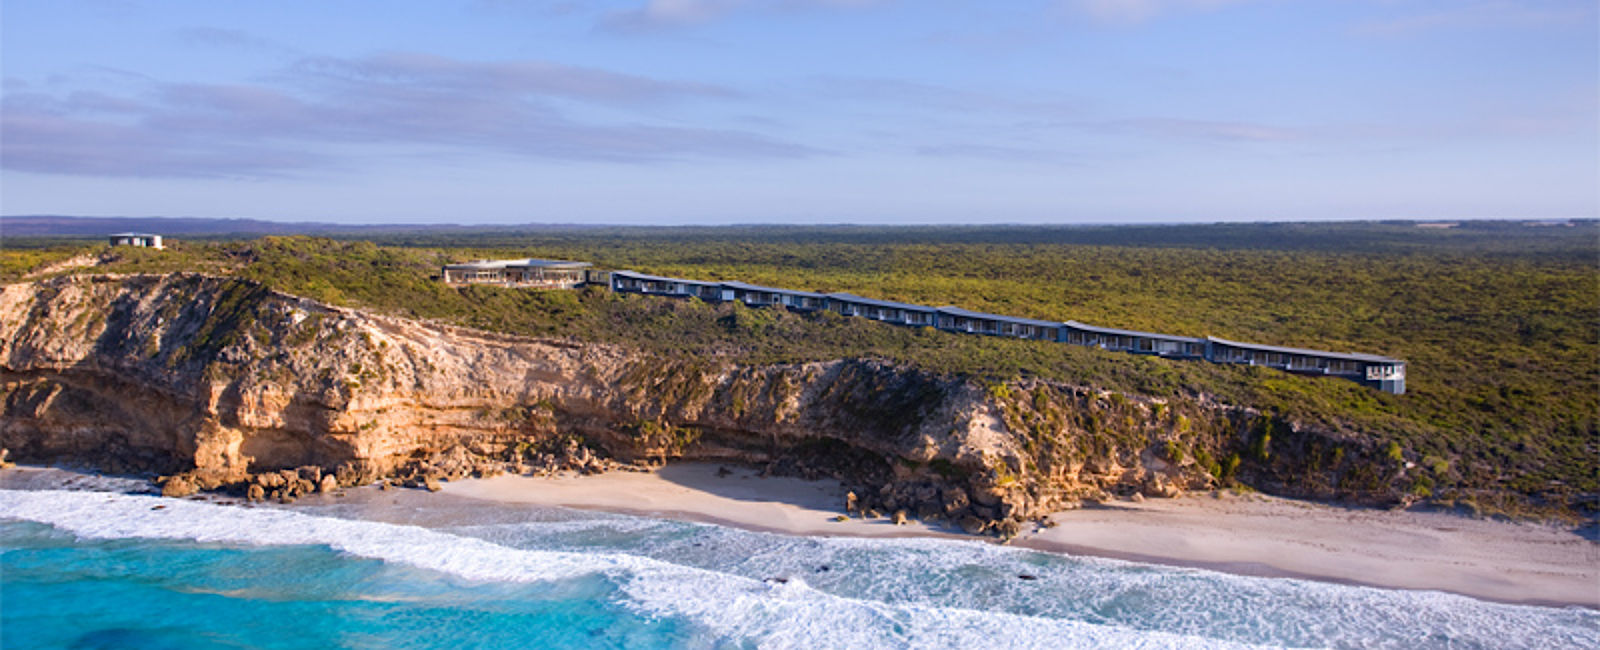 VERY SPECIAL HOTEL
 Southern Ocean Lodge 
 Paradies mit Weitblick 